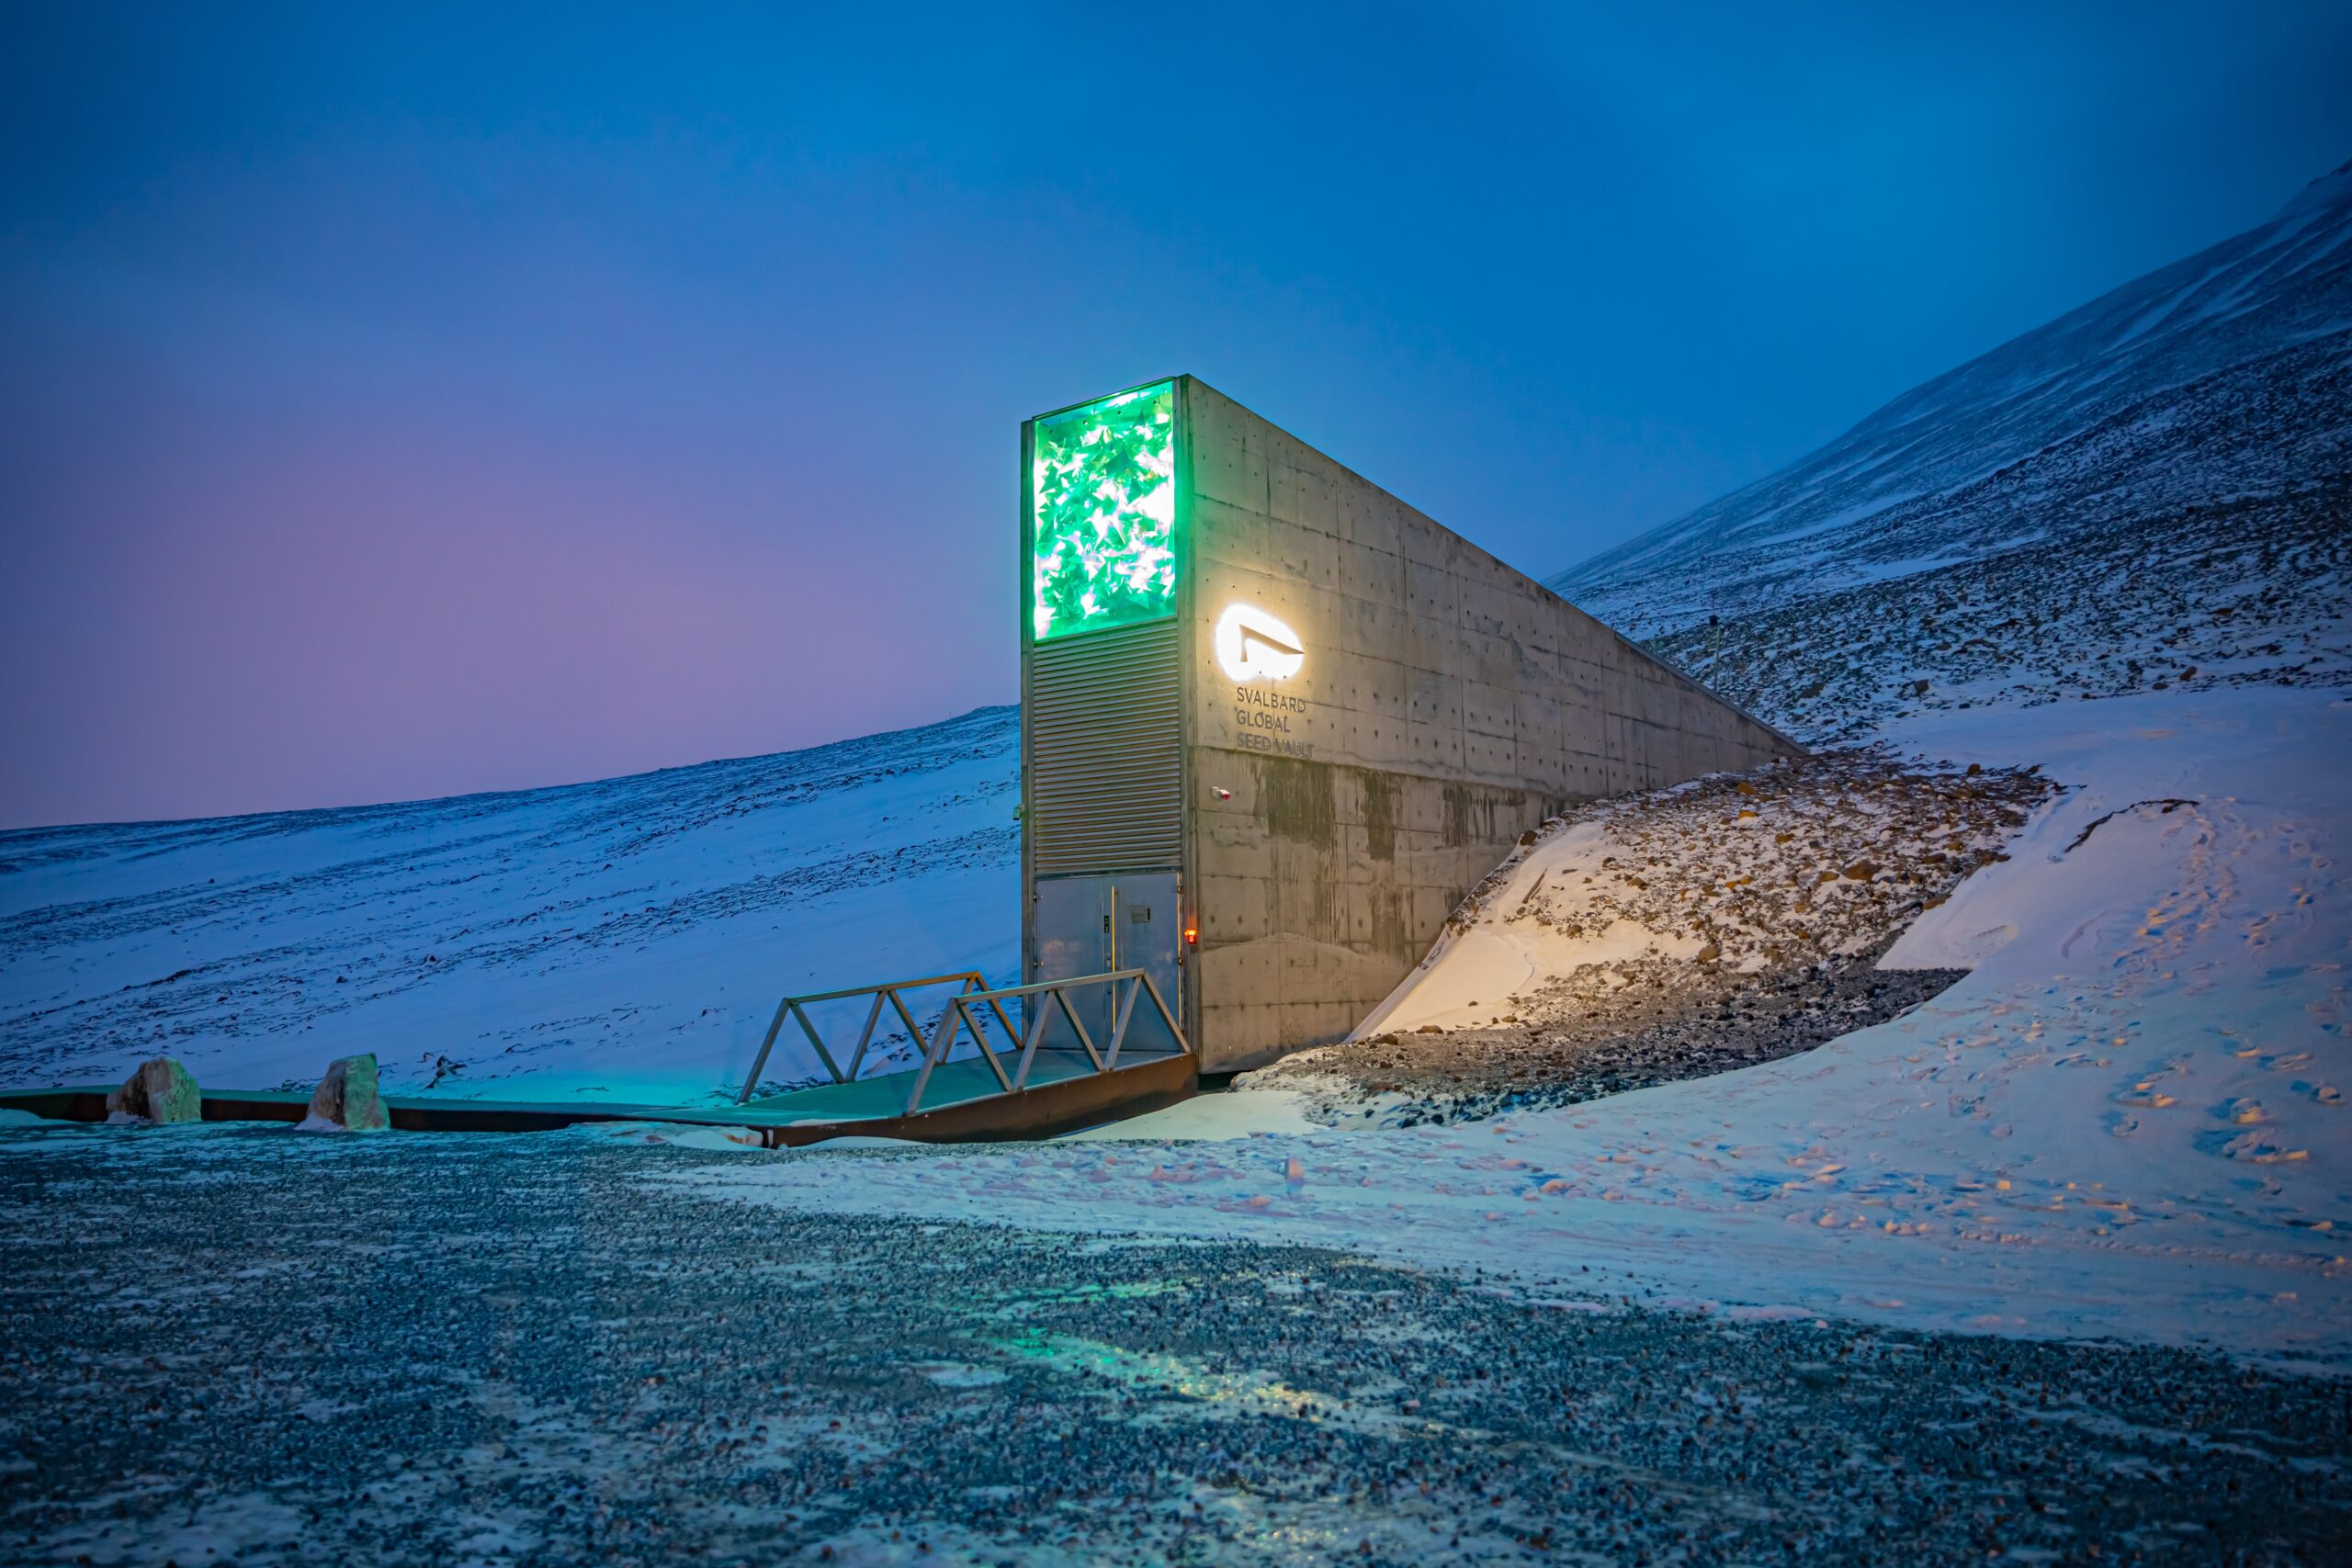 <p><span>This “Doomsday Vault” is located on a remote island in the Arctic and stores seeds from around the world in case of a global catastrophe. Established in 2008 by the Norwegian government in partnership with the Global Crop Diversity Trust, the vault transcends national boundaries. It is a testament to international cooperation in safeguarding our planet’s food security. Public access is limited to protect the seed bank’s integrity.</span></p>